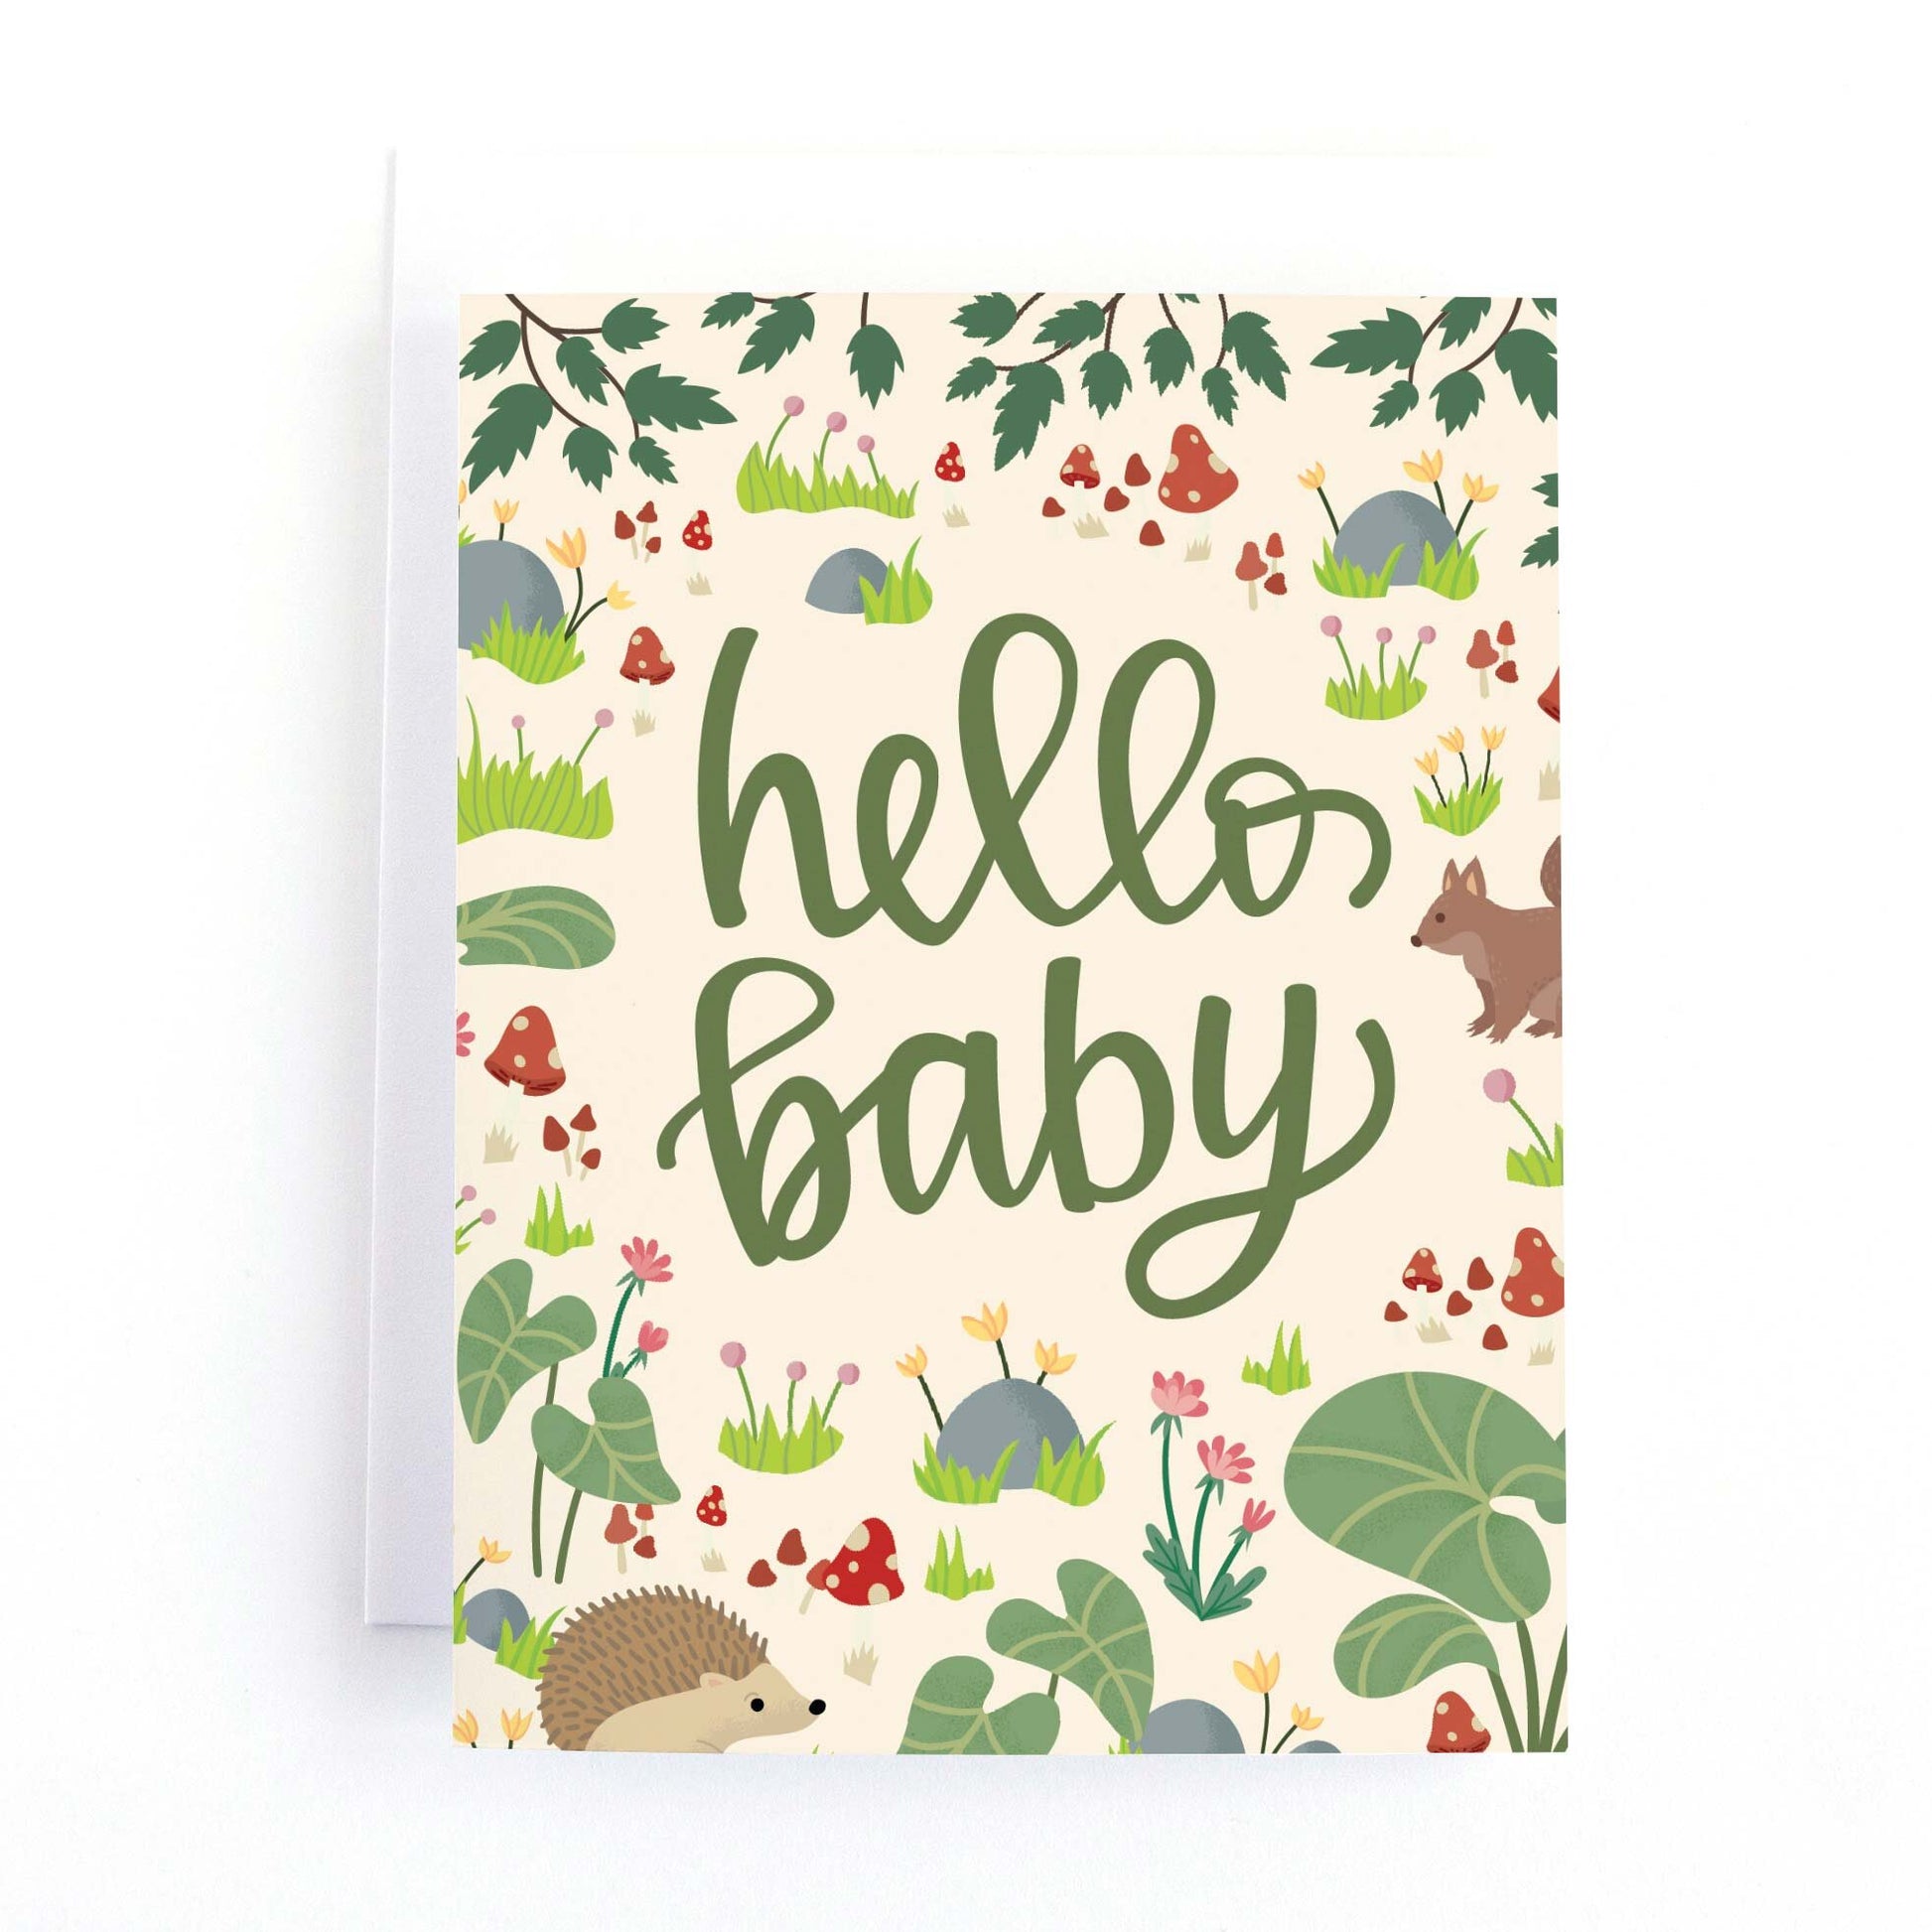 Baby Shower card with woodland forest illustrations including a squirrel, hedgehog and mushrooms and the message hello baby